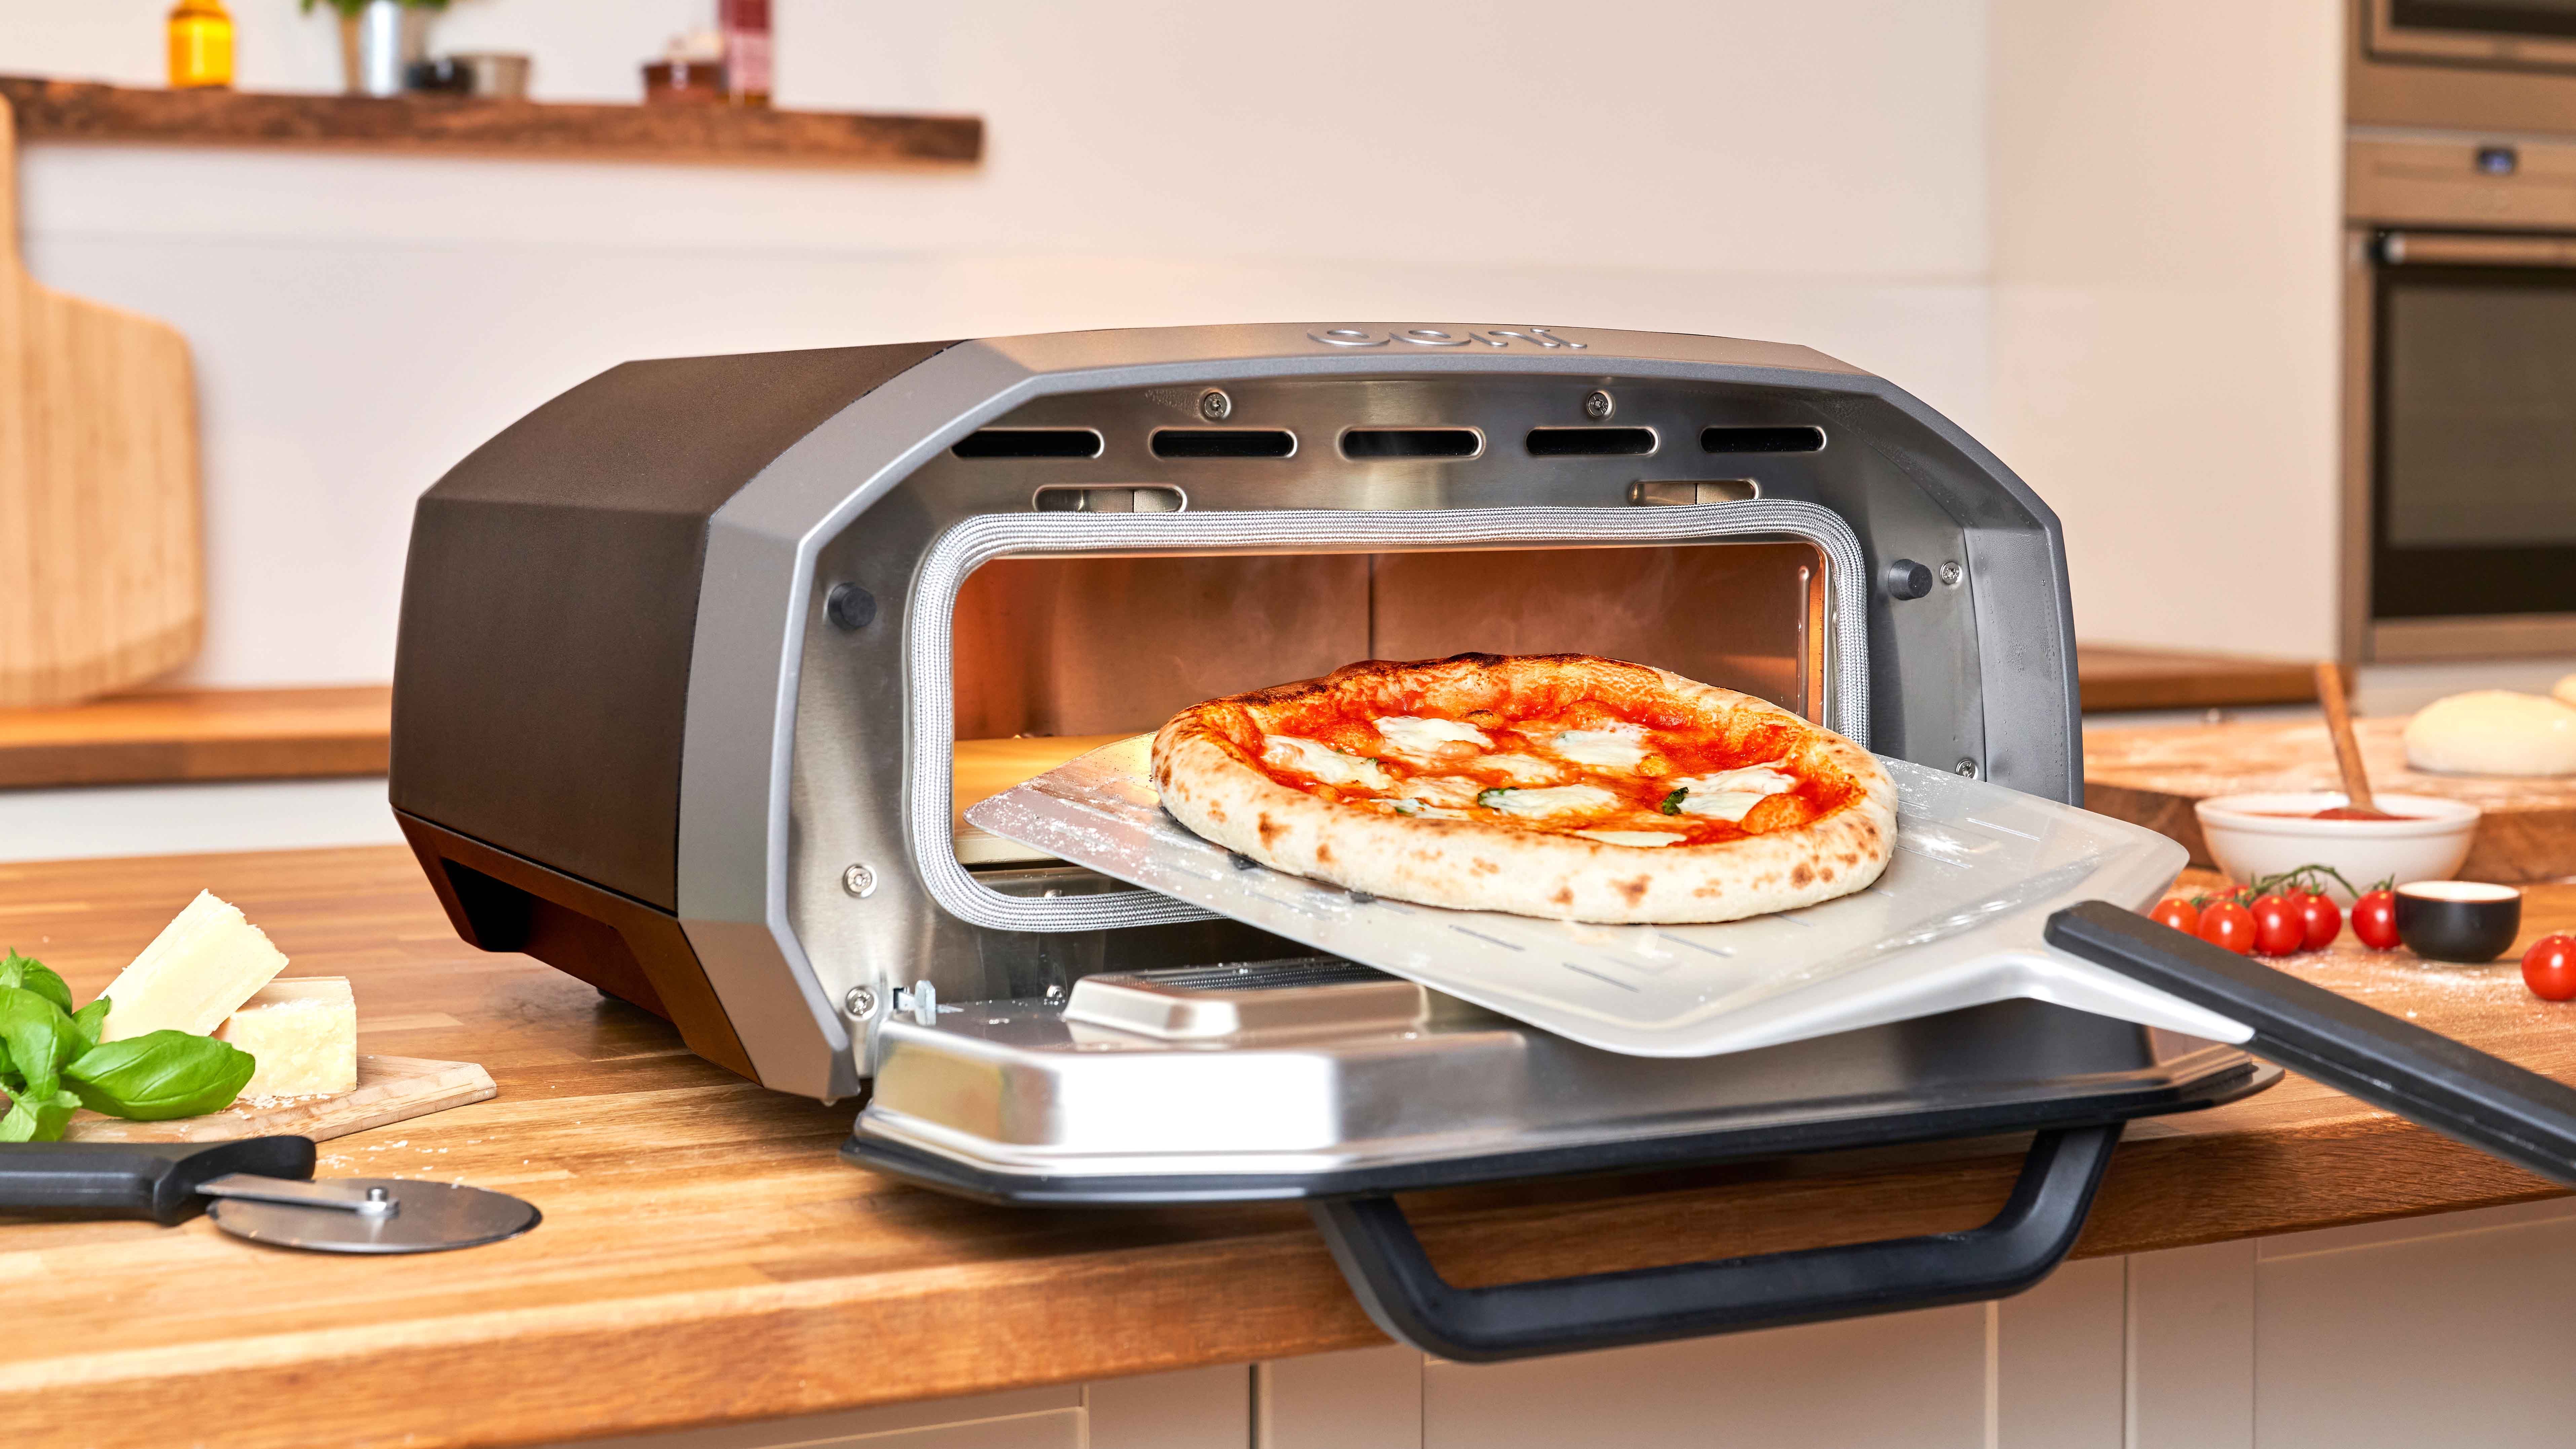 Energy-Light Cooking: Toaster Oven Pizza